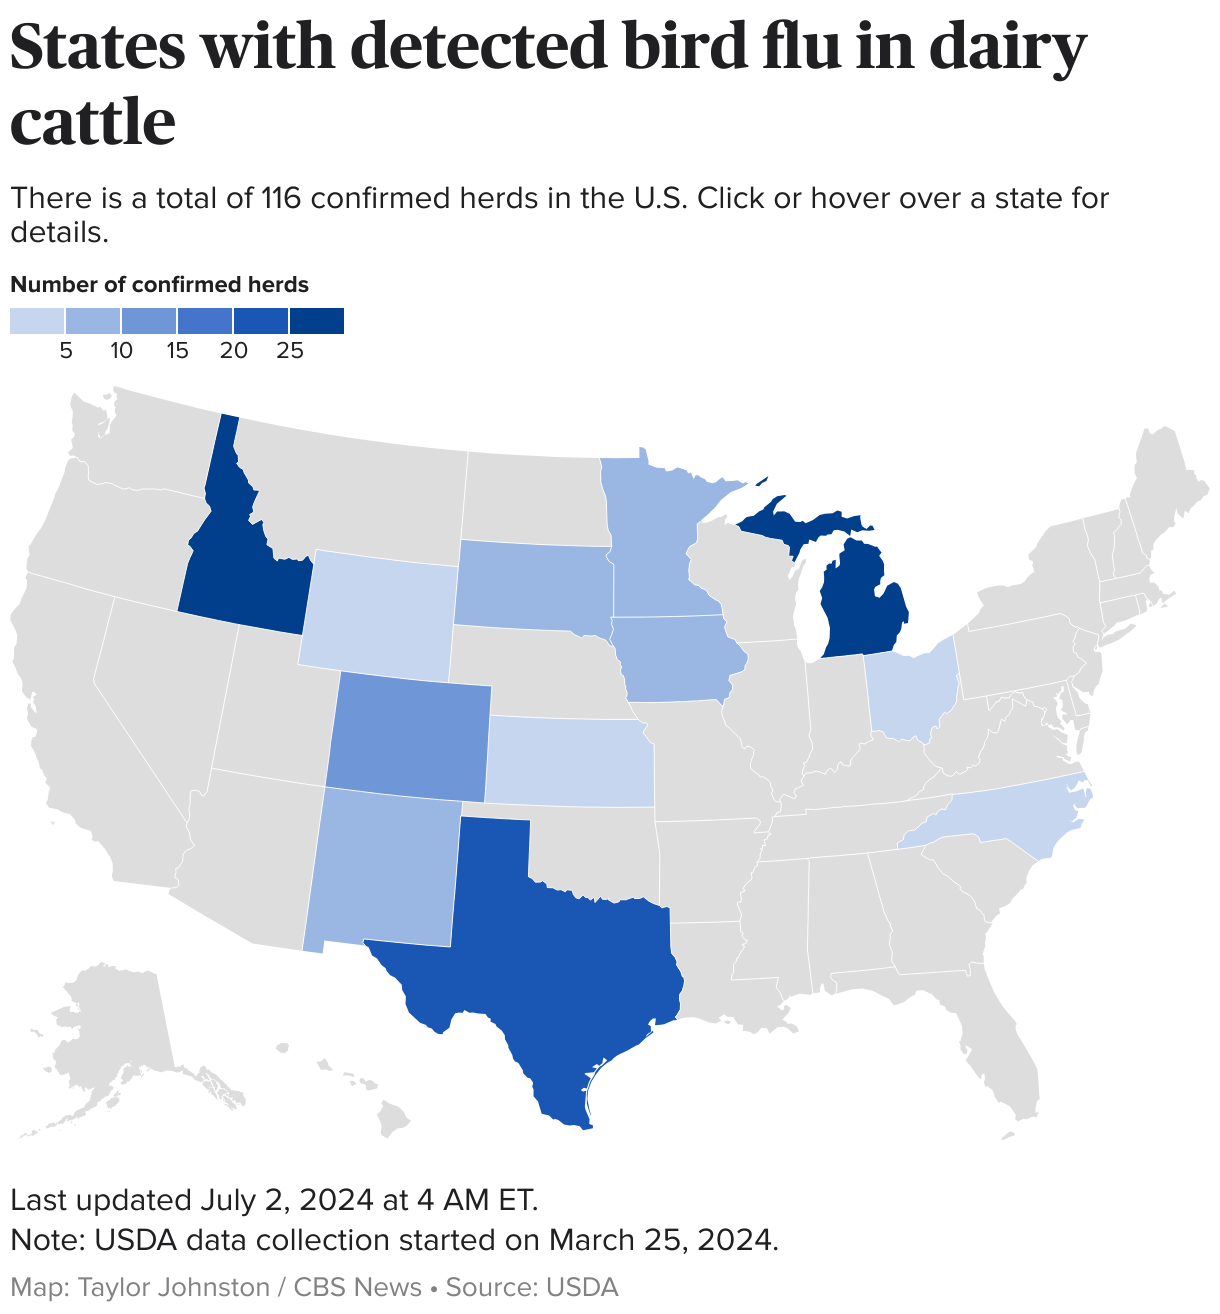 Map of the U.S. showing which states have detected bird flu in dairy cattle.